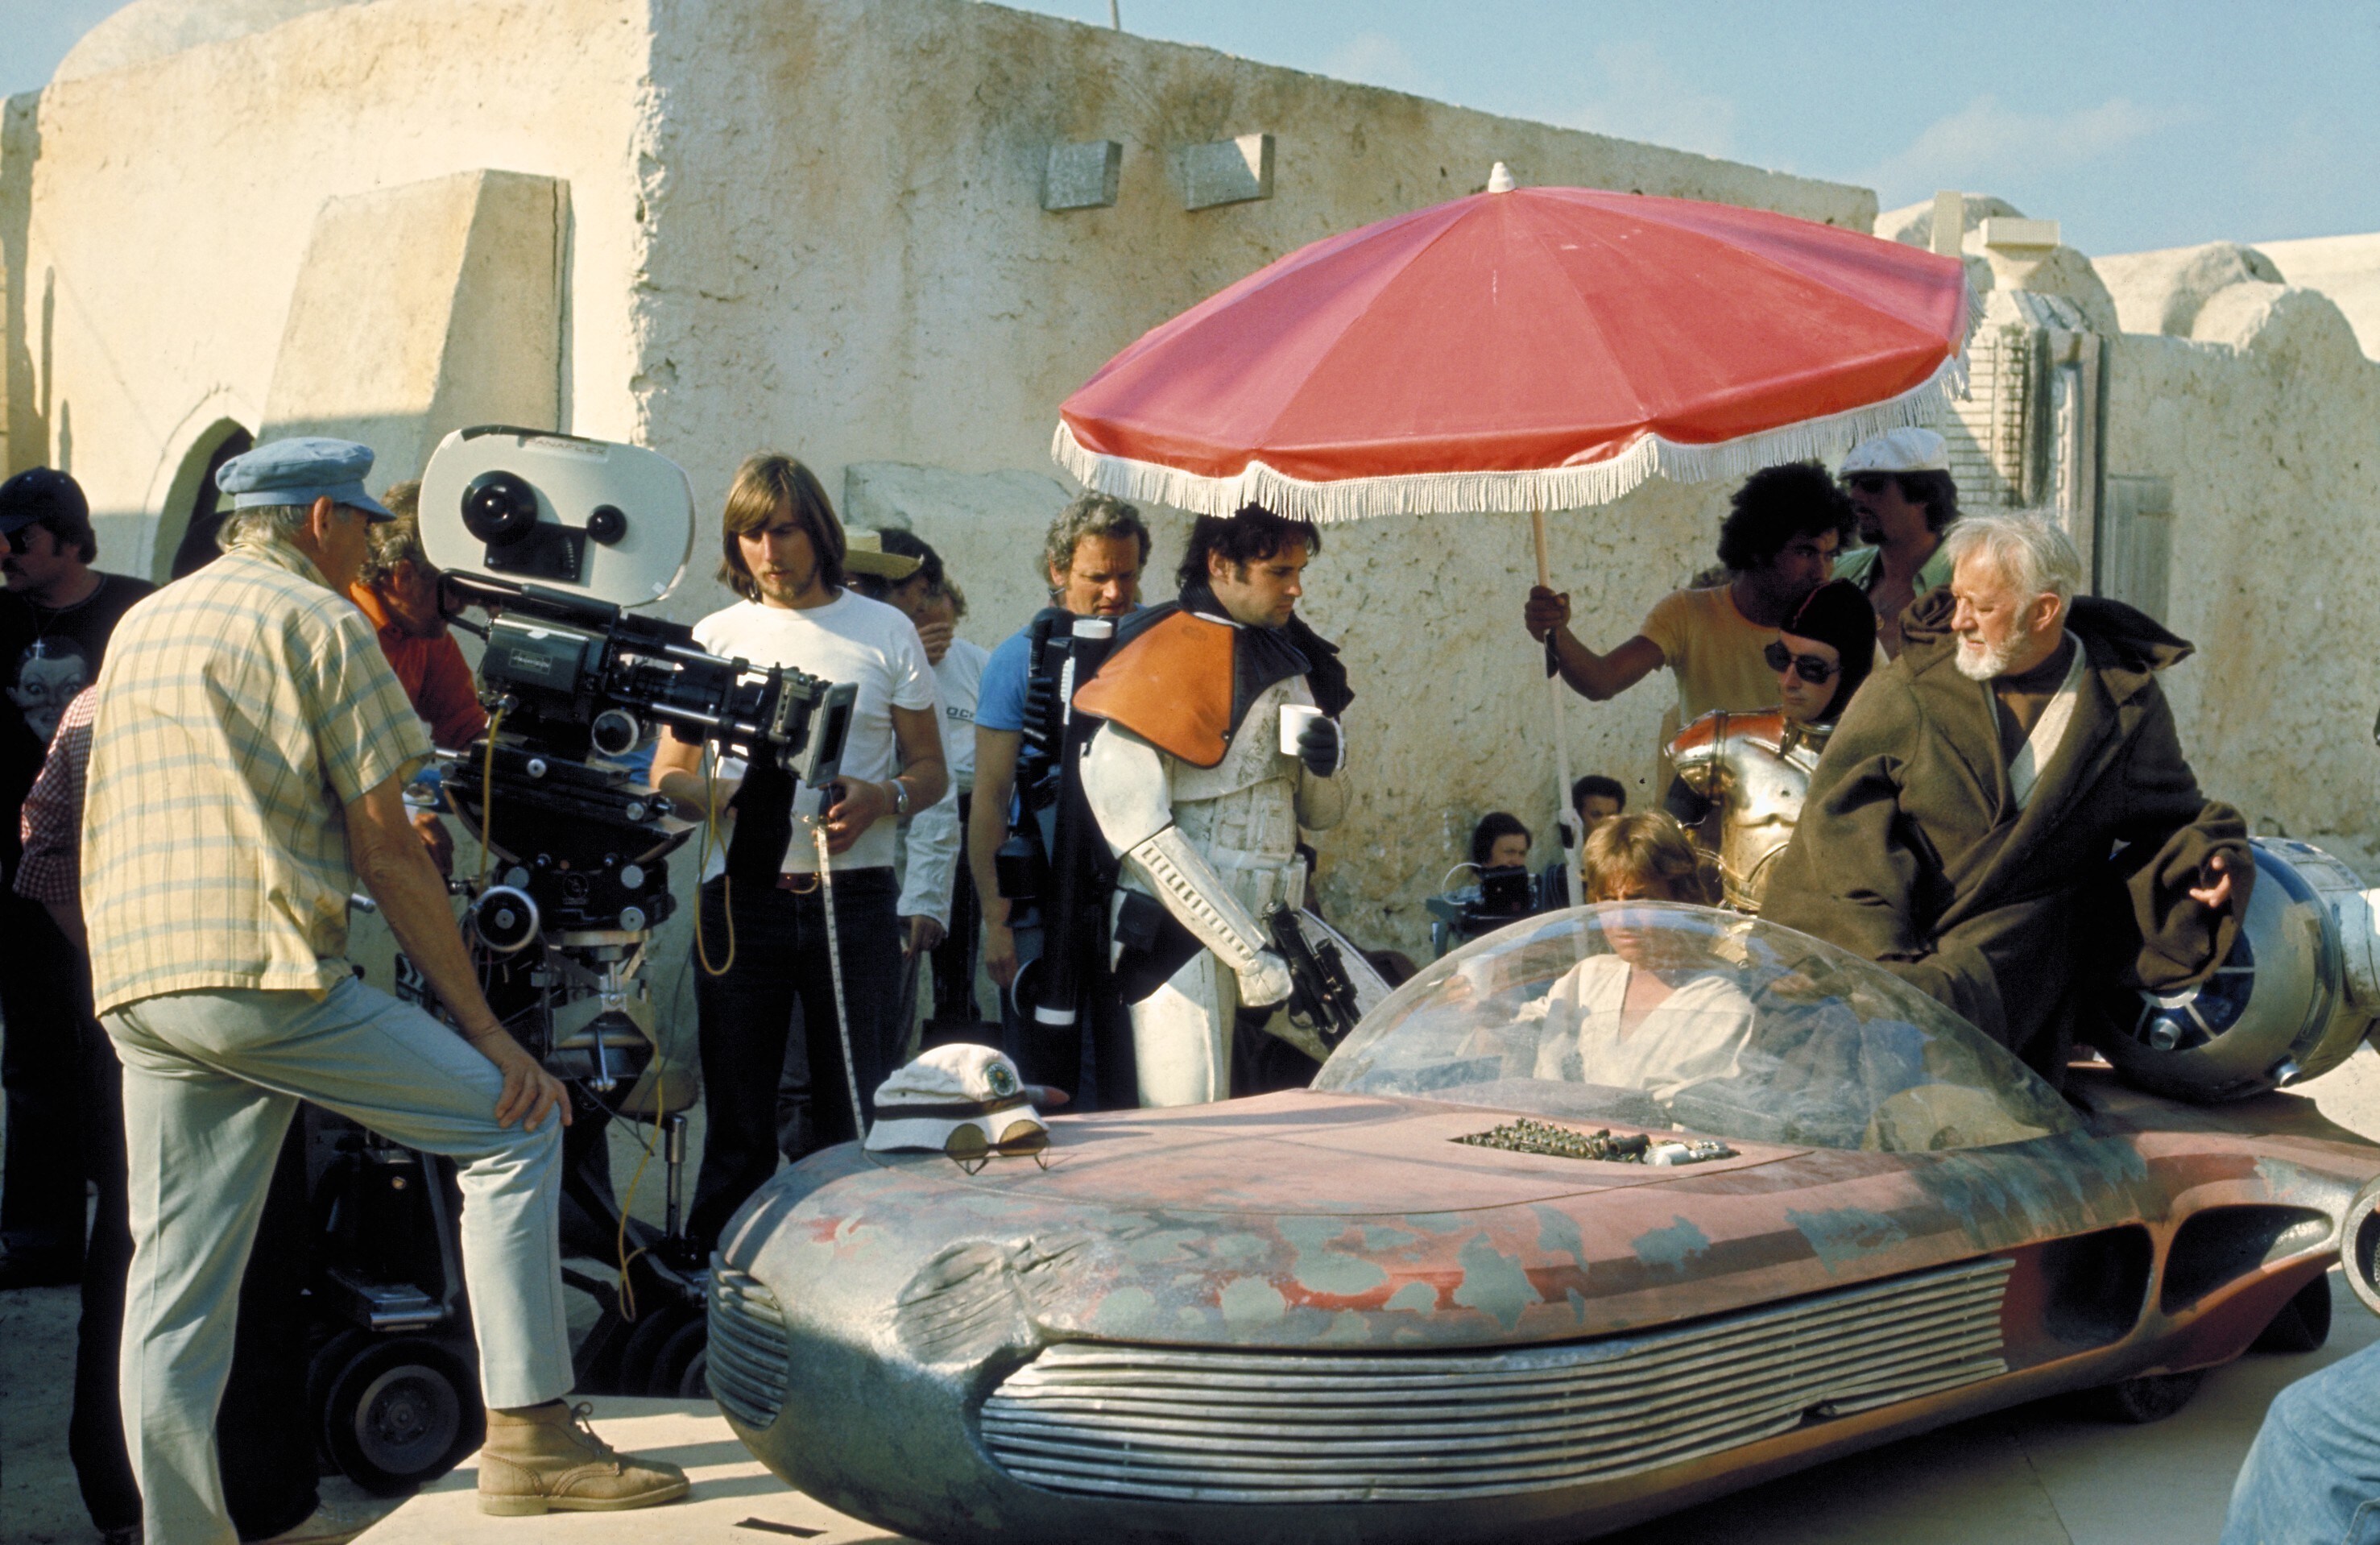 Shooting the Jedi mind trick sequence in Tunisia.